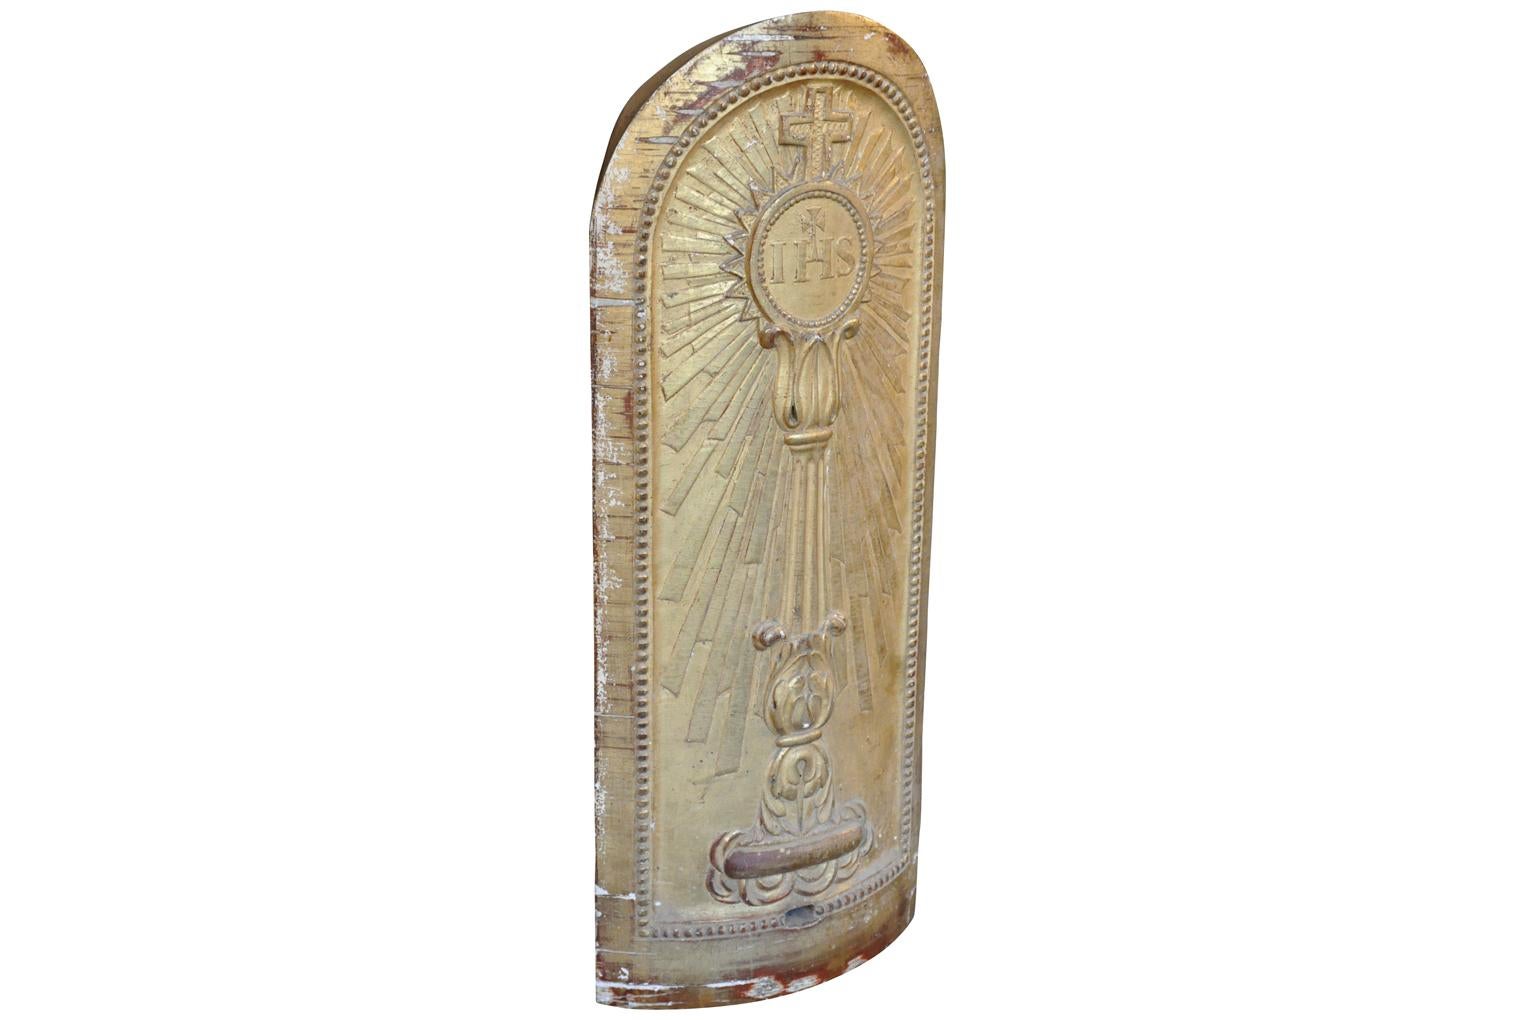 A very lovely mid-19th century Altar Fragment in gilt wood. Beautifully carved with a stunning sunburst.